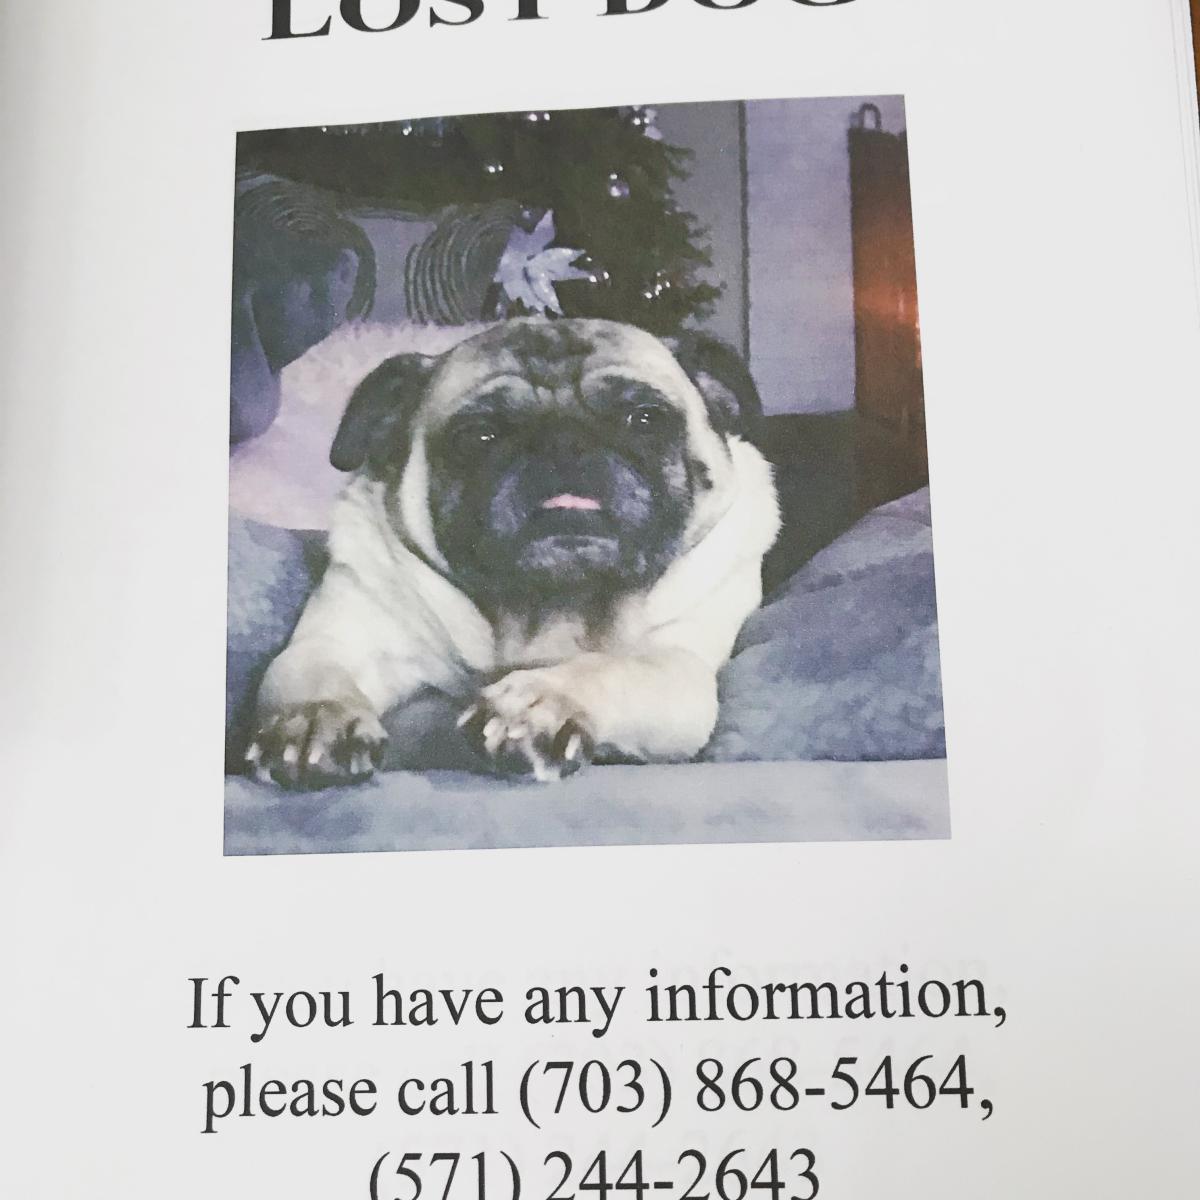 Image of Neo, Lost Dog